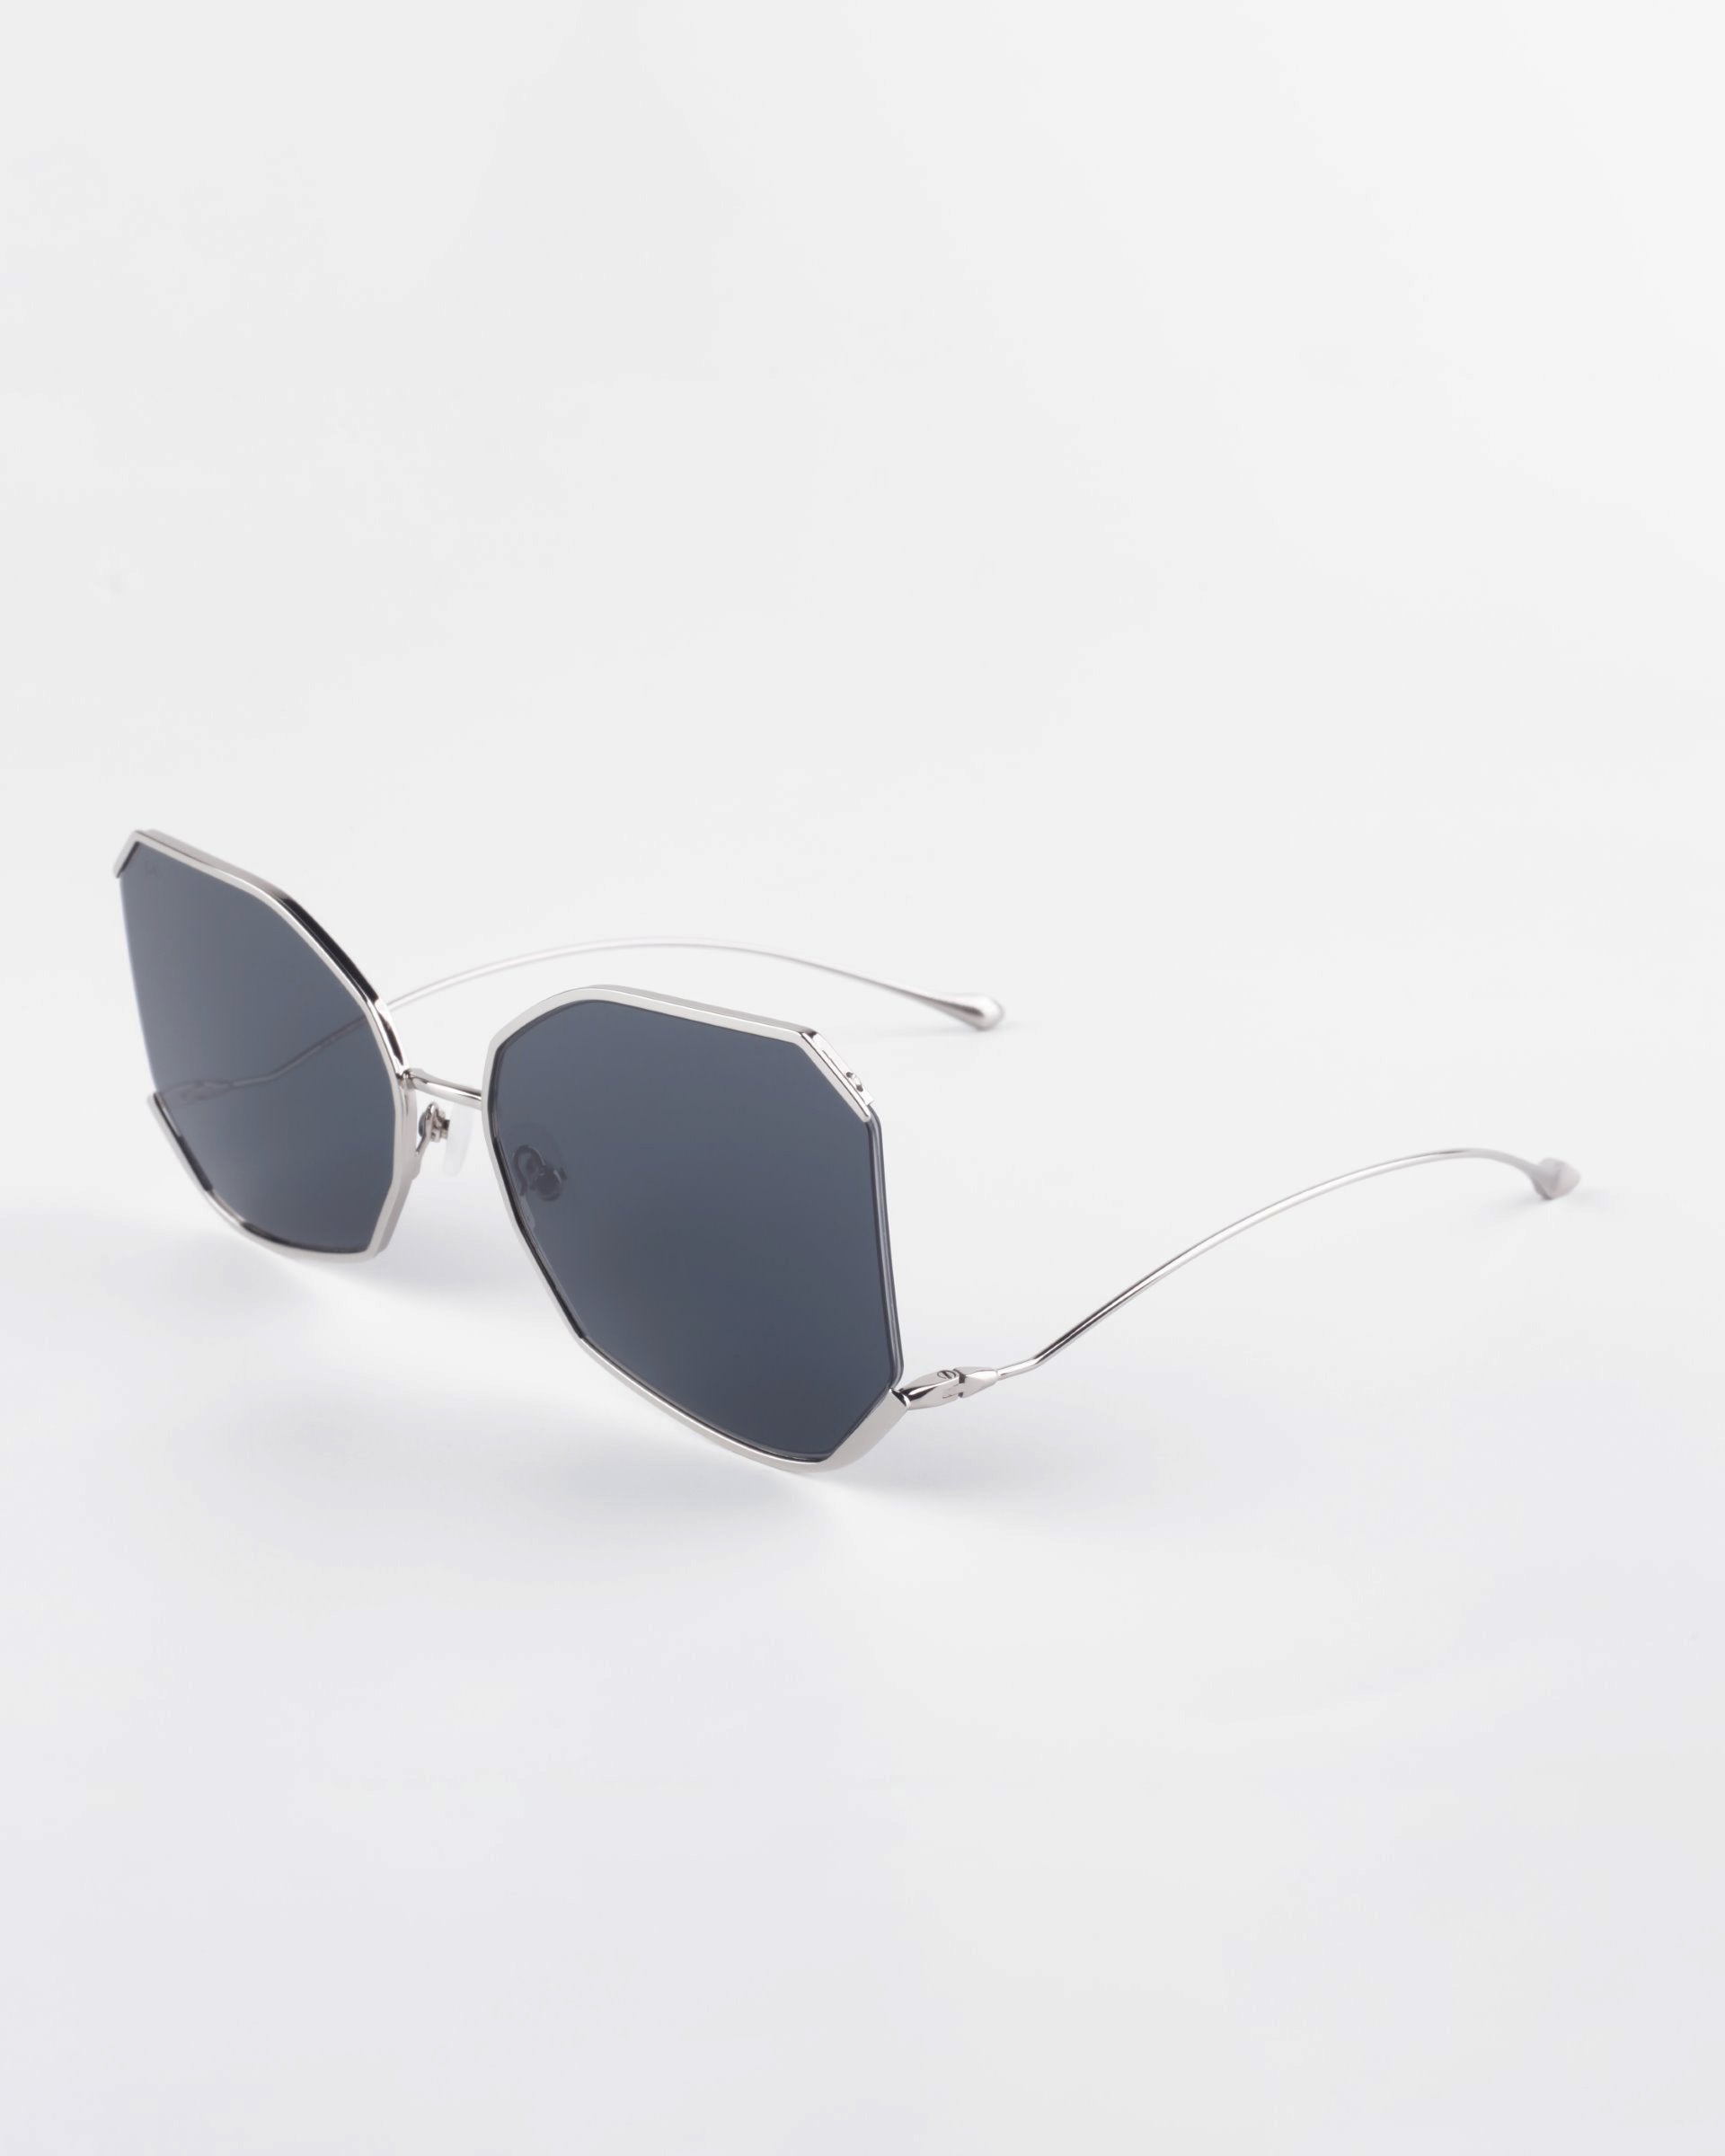 A pair of modern, silver-framed sunglasses with unique angular, dark-tinted lenses is displayed against a plain white background. The gold-plated stainless steel design features sleek, thin arms adding to the minimalist aesthetic and 100% UVA &amp; UVB protection. The product name is Painter from For Art&#39;s Sake®.